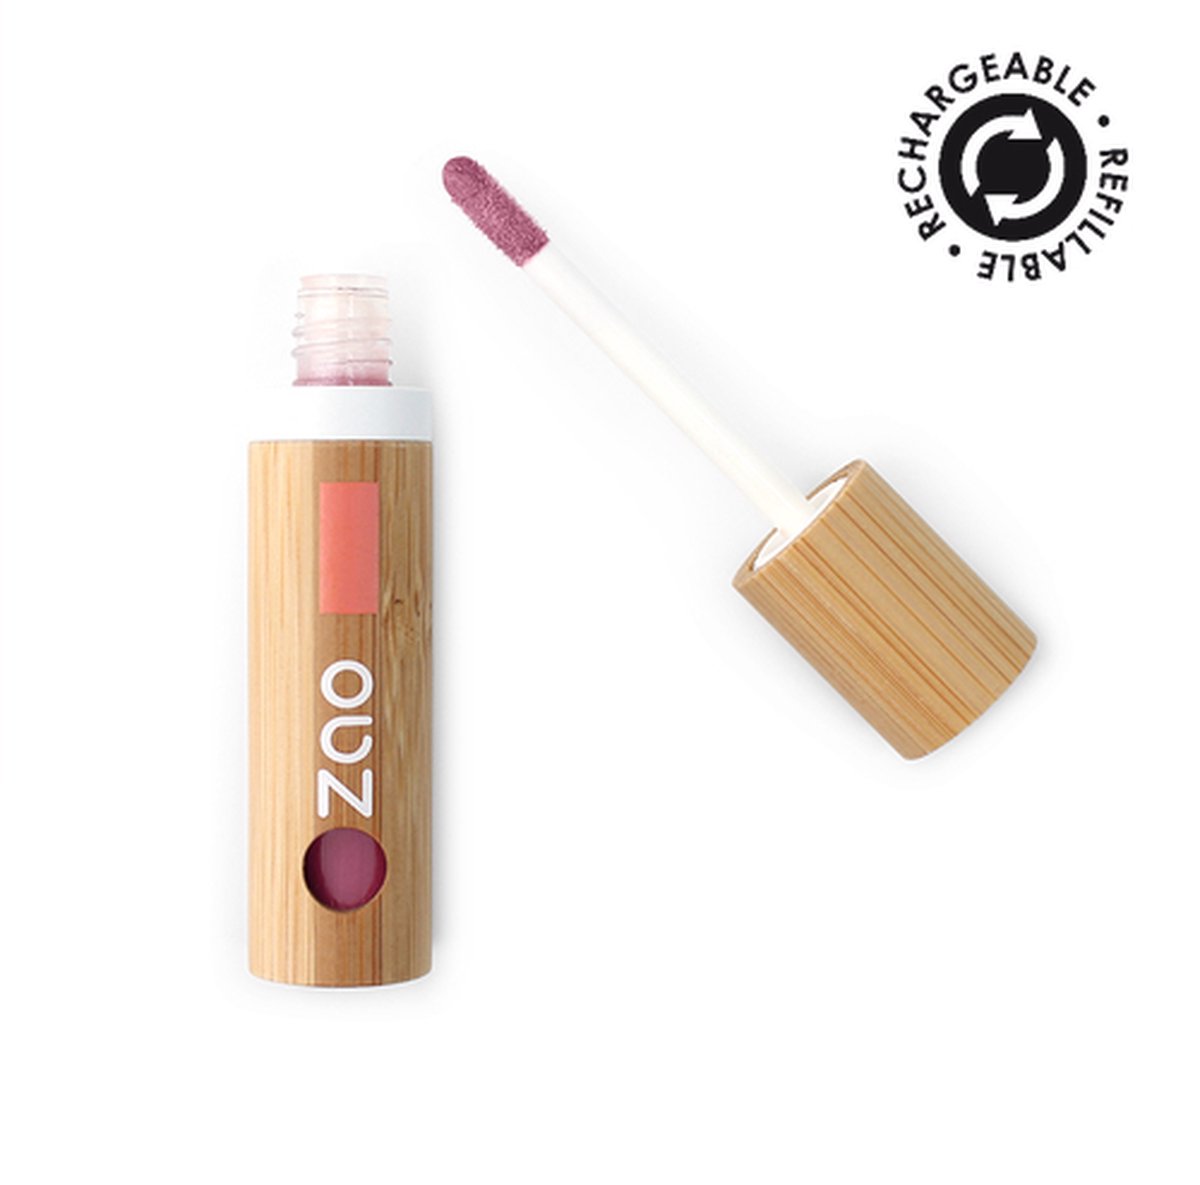 Bamboe Lipgloss 014 (Antique Pink)